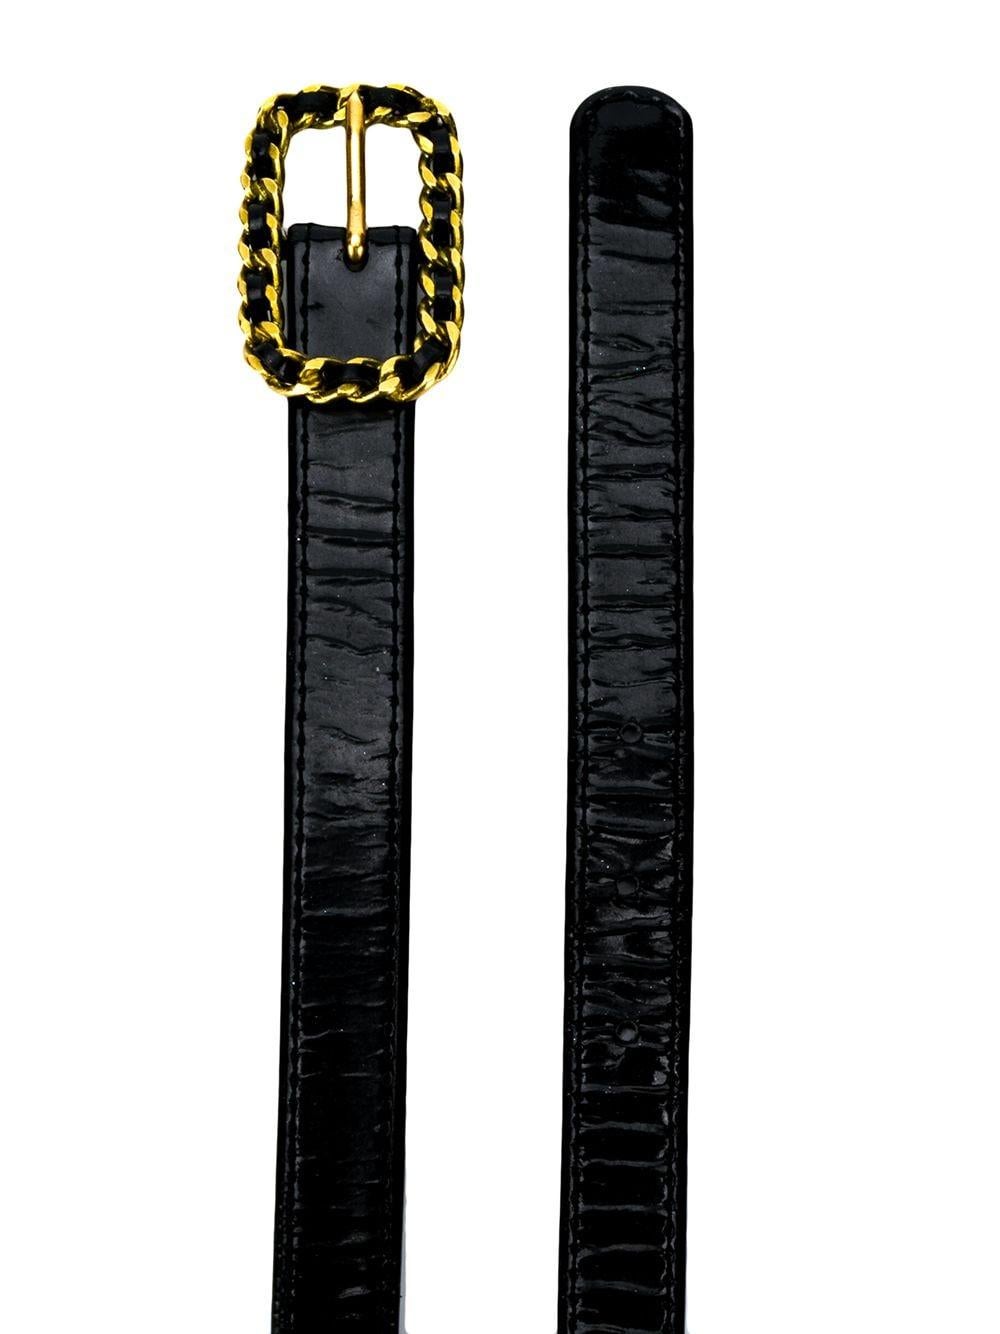 1995s Chanel black patent leather belt featuring a  gold- tone chain buckle, an inside logo stamp 95 for 1995. 
See attached Karen Mulder, Claudia Schiffer campaign.
Size:75
Circa: 1995s
Length 31.1in. (79cm)
Width 0.6in (1.5cm)
Buckle 1.5in. (4cm)